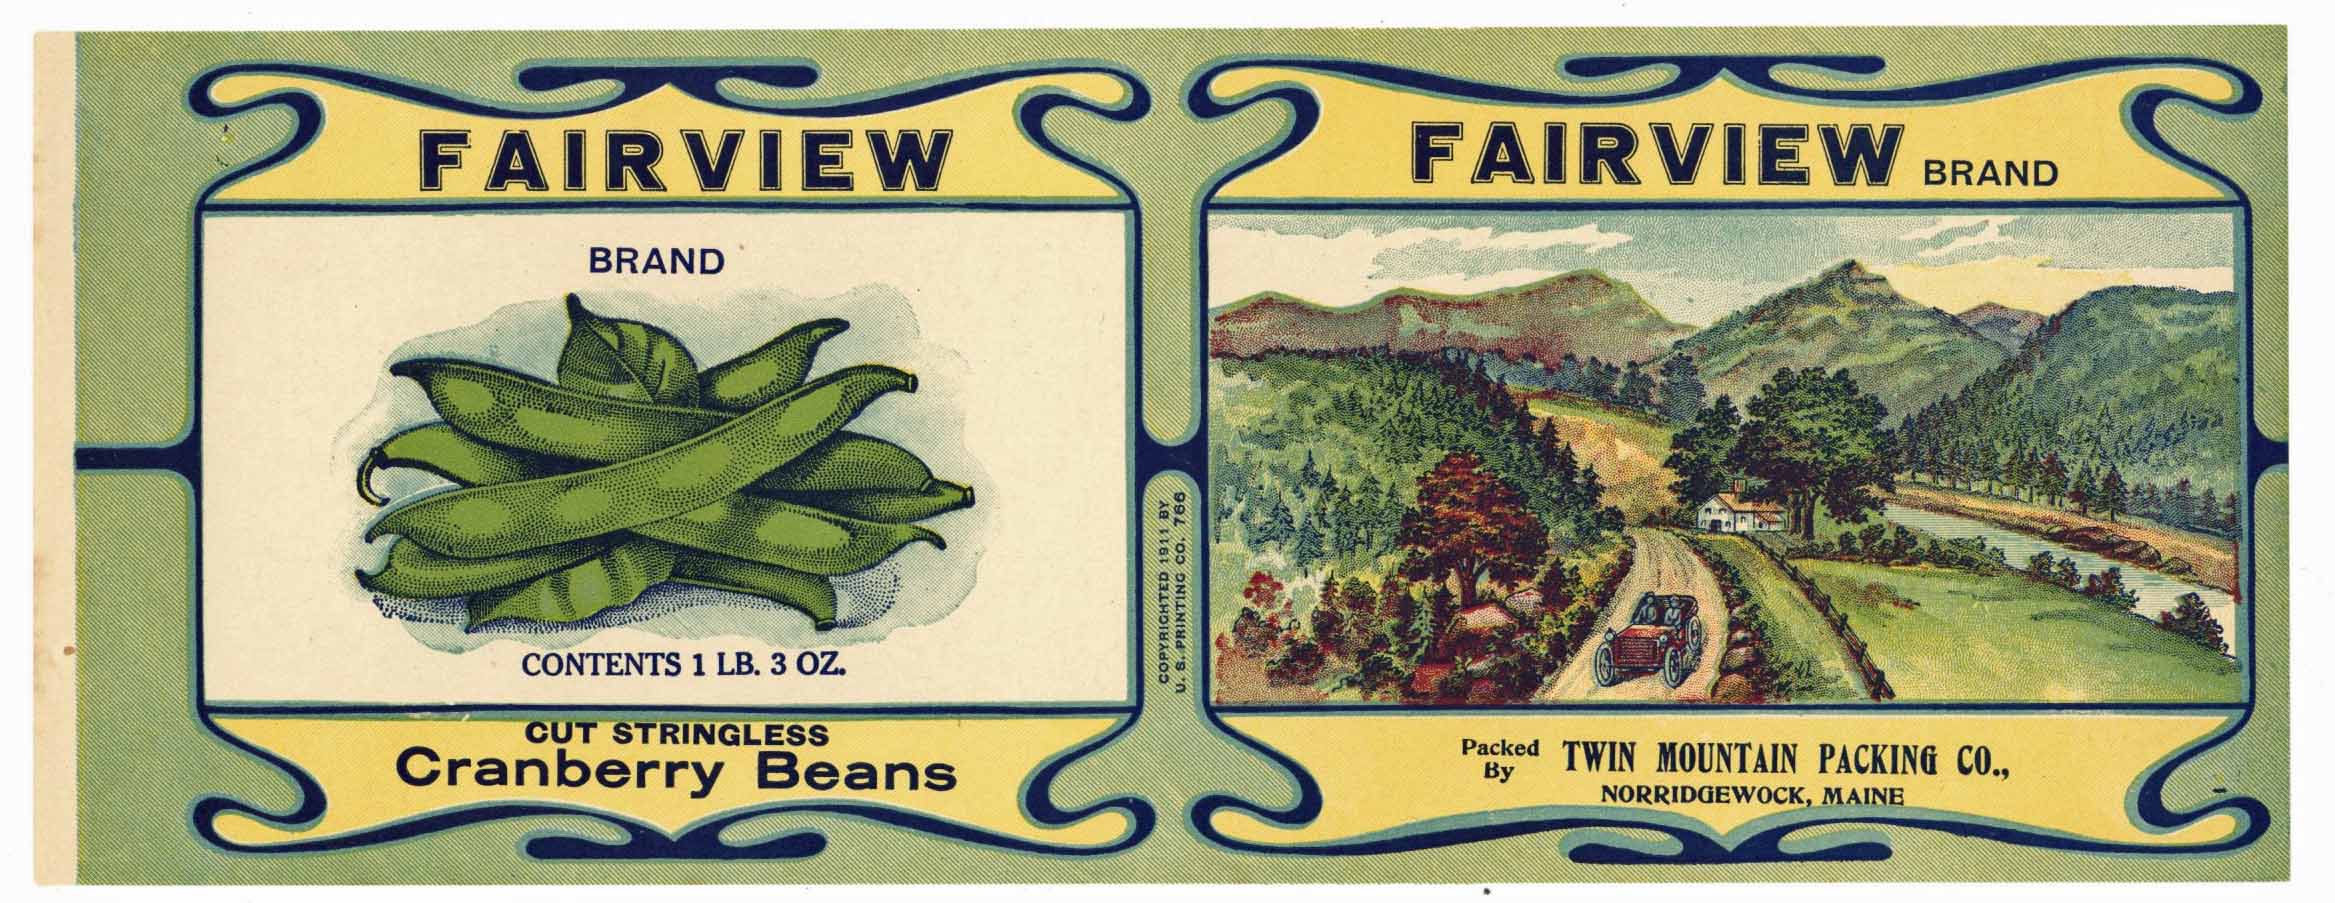 **AN ORIGINAL 1930’s TIN CAN LABEL** FARMERS PRIDE Vintage Lima Bean Can Label 